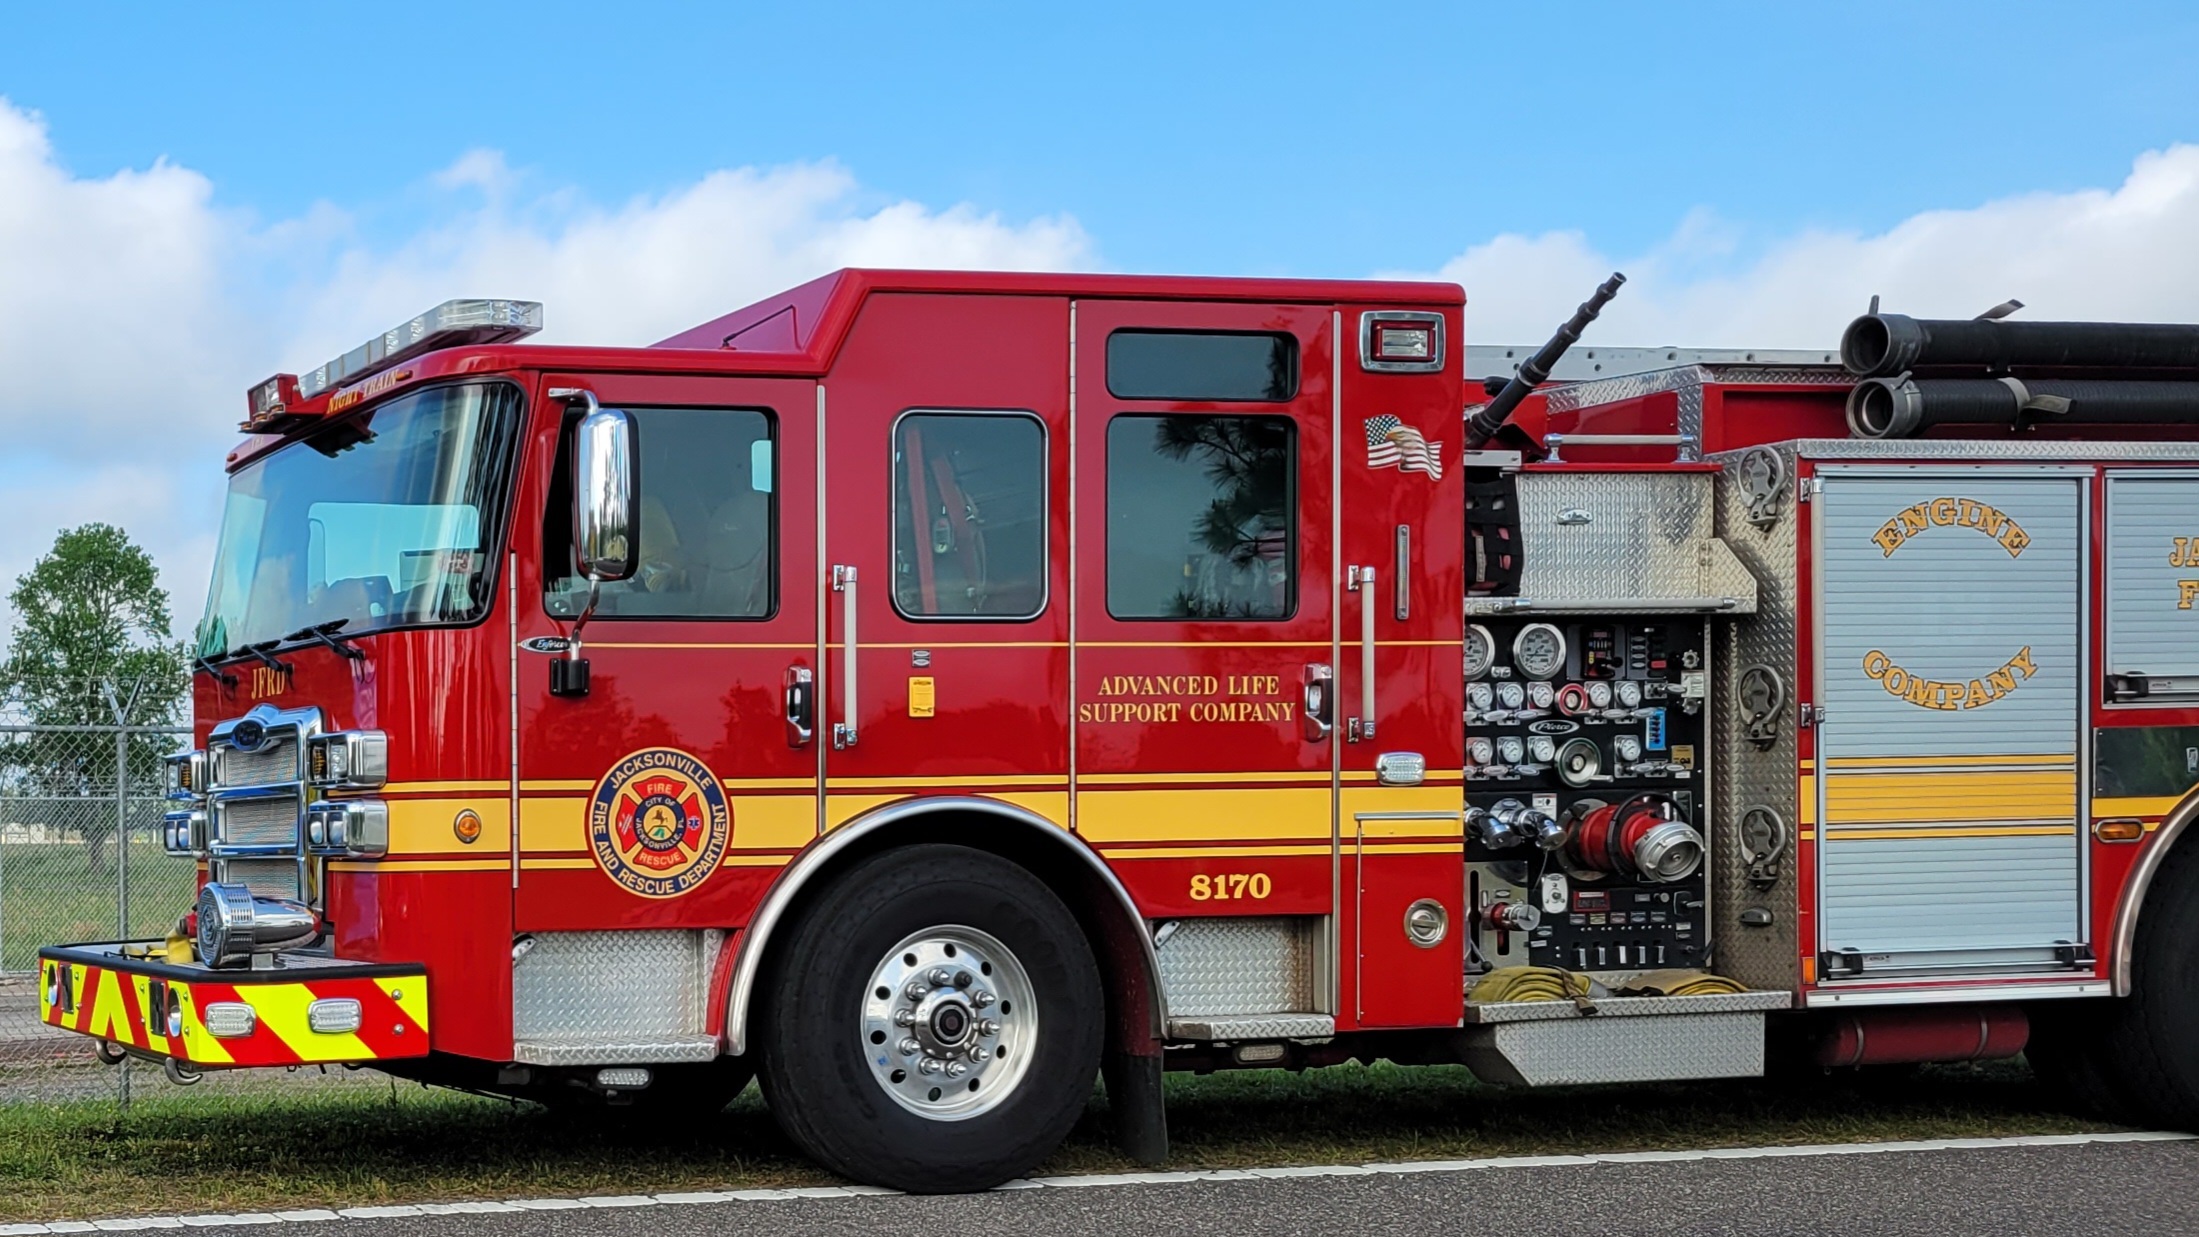 A Jacksonville Fire & Rescue truck parks at a recent city event on Jacksonville's Northside.